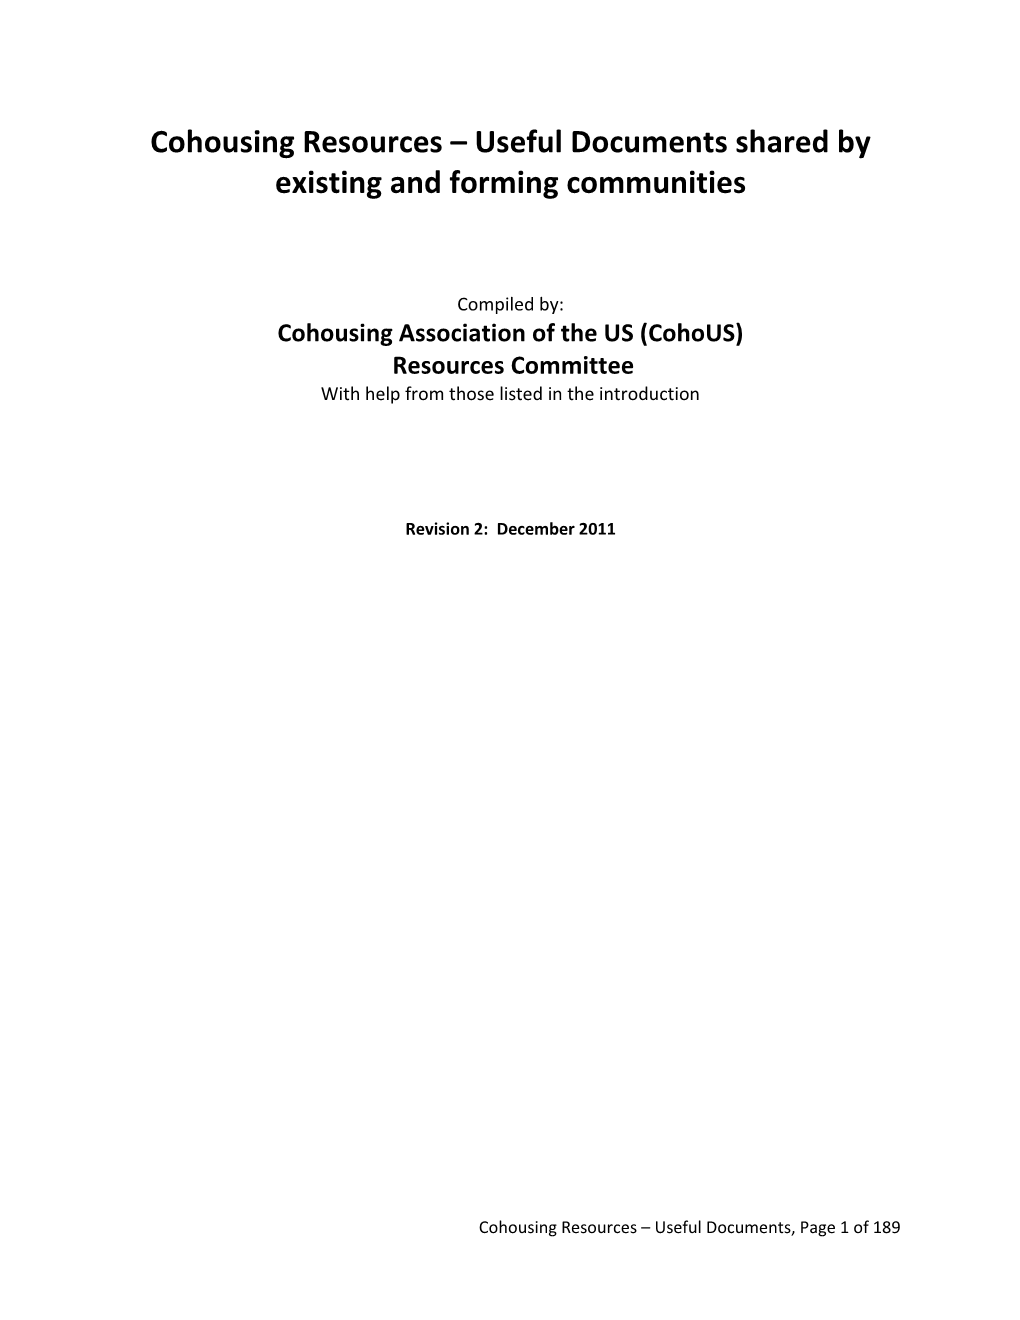 Cohousing Resources – Useful Documents Shared by Existing and Forming Communities